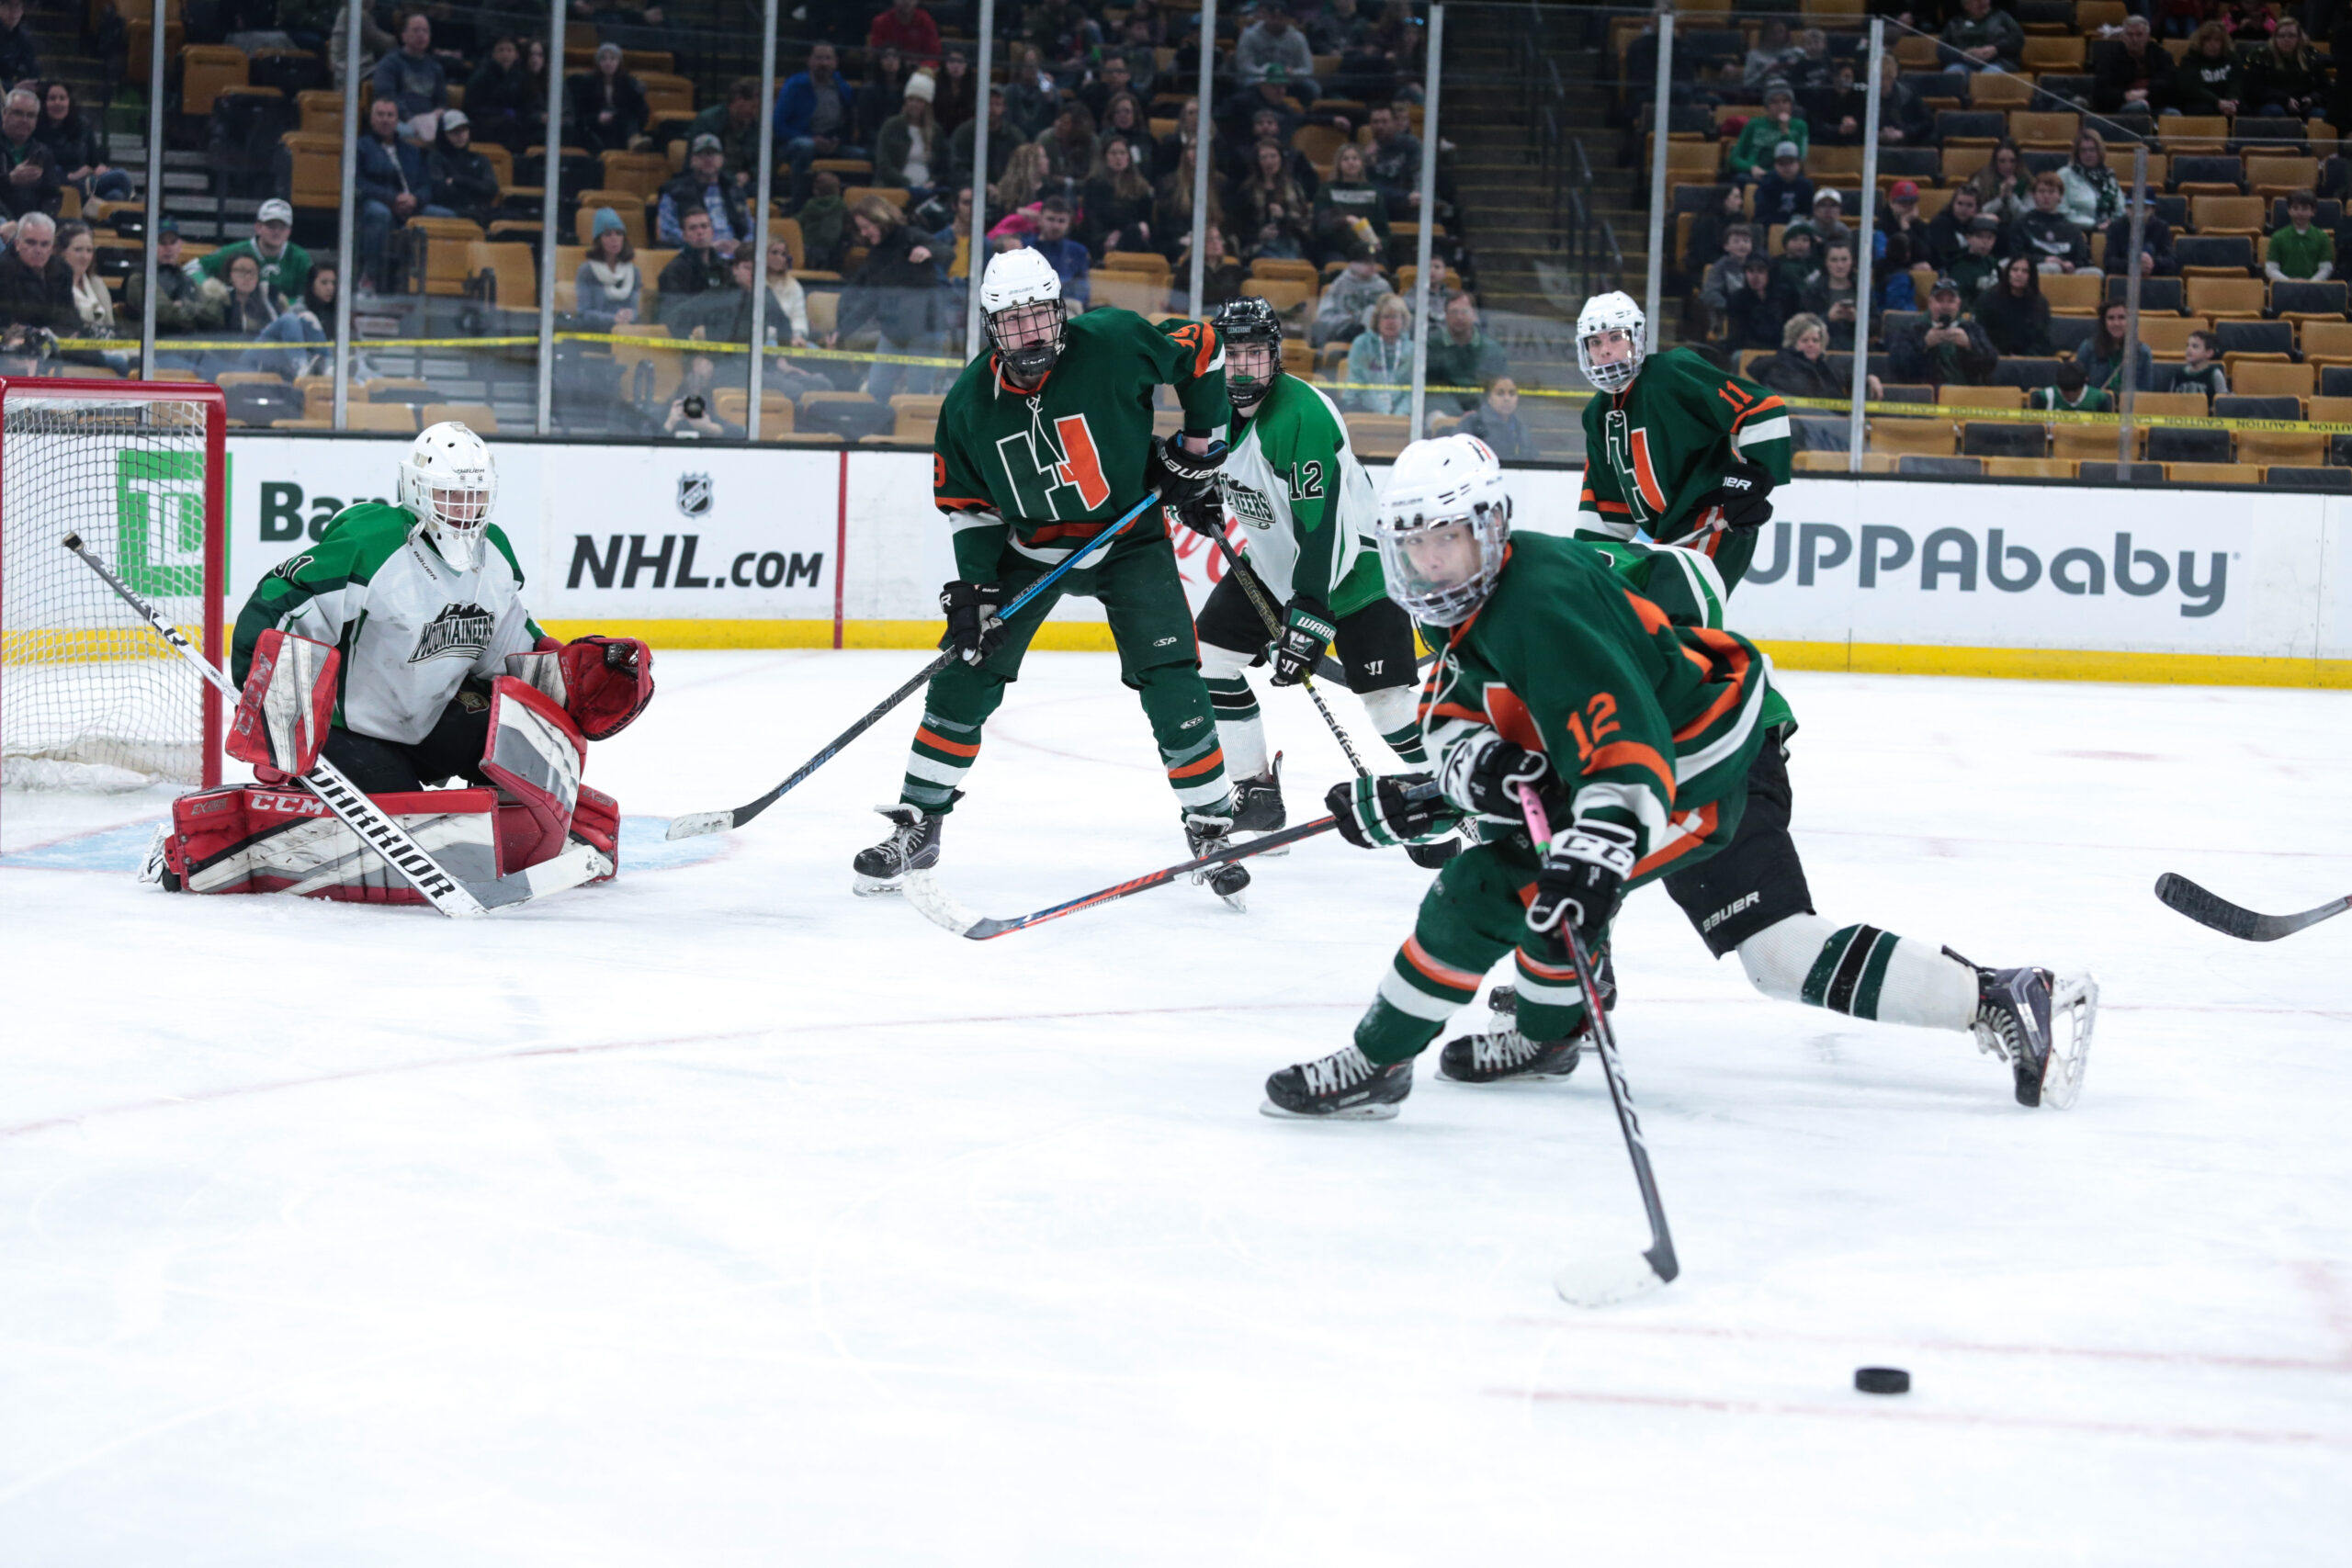 Hillers skate to second as underdog run ends at TD Garden